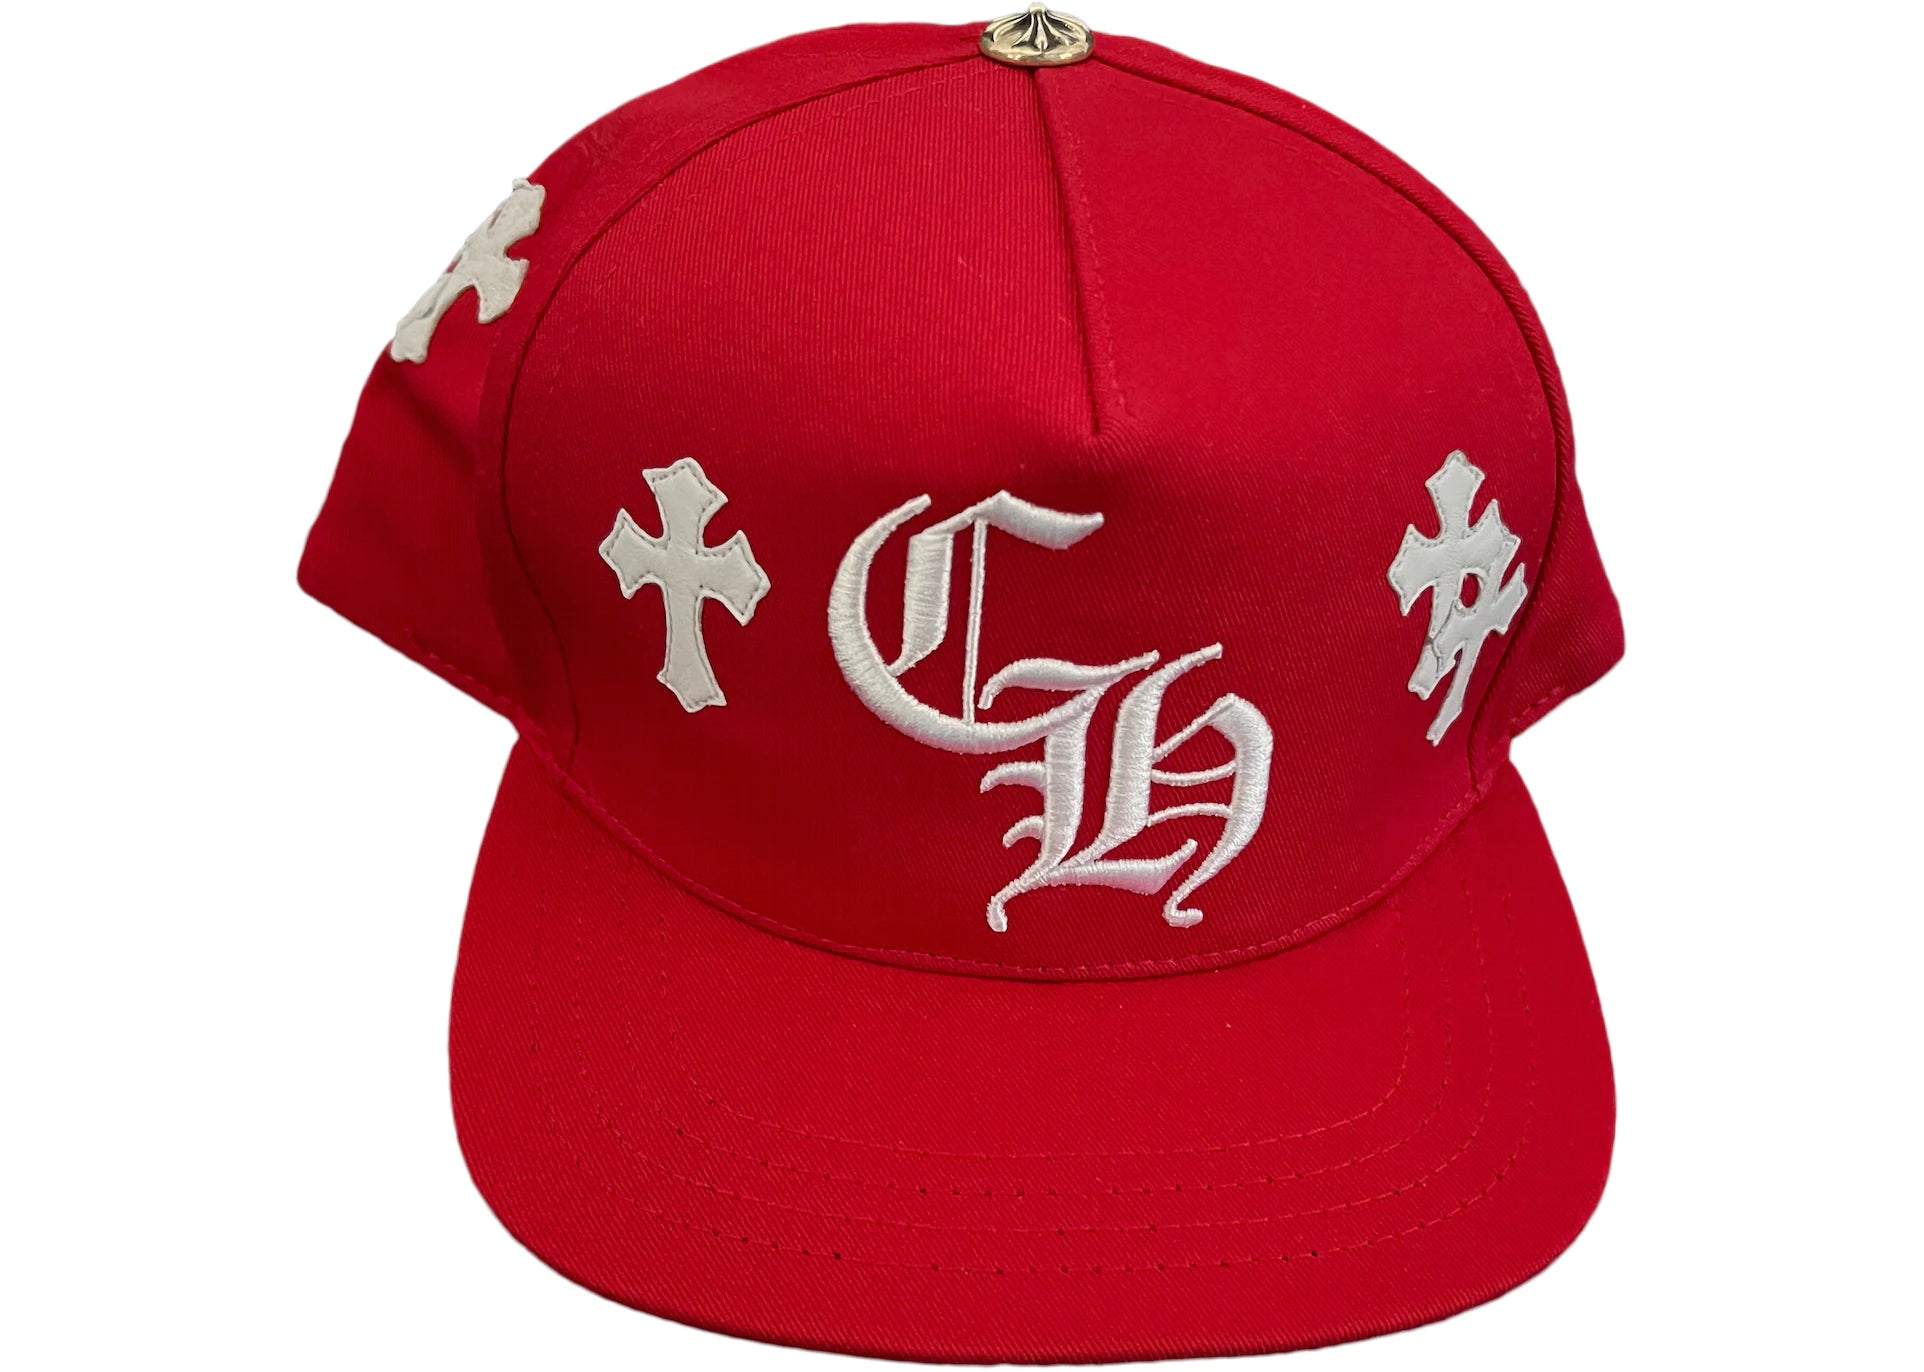 Chrome Hearts Cross Patch Baseball Hat Red